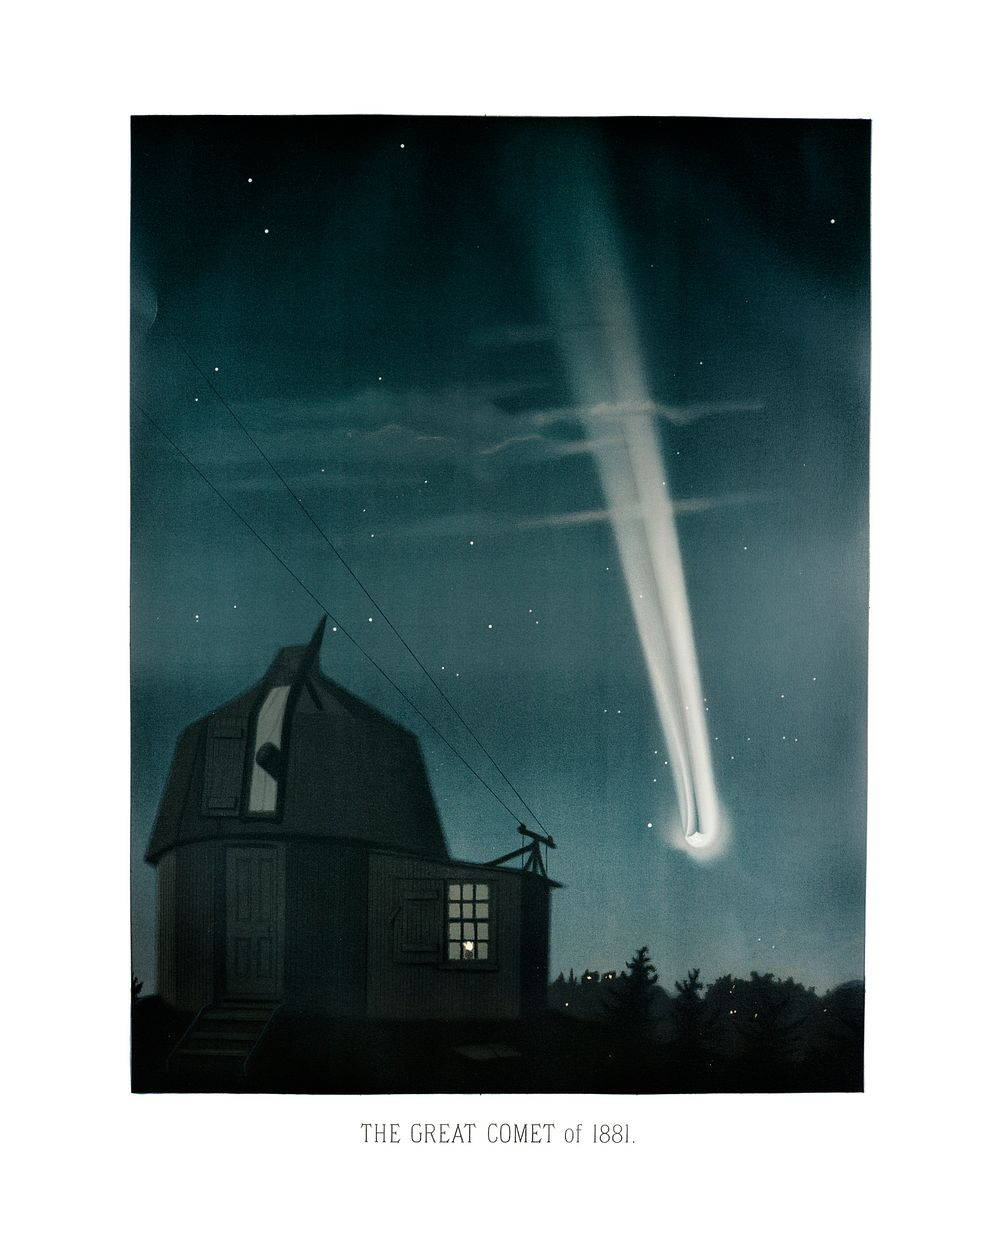 The great comet illustration wall art print and poster.